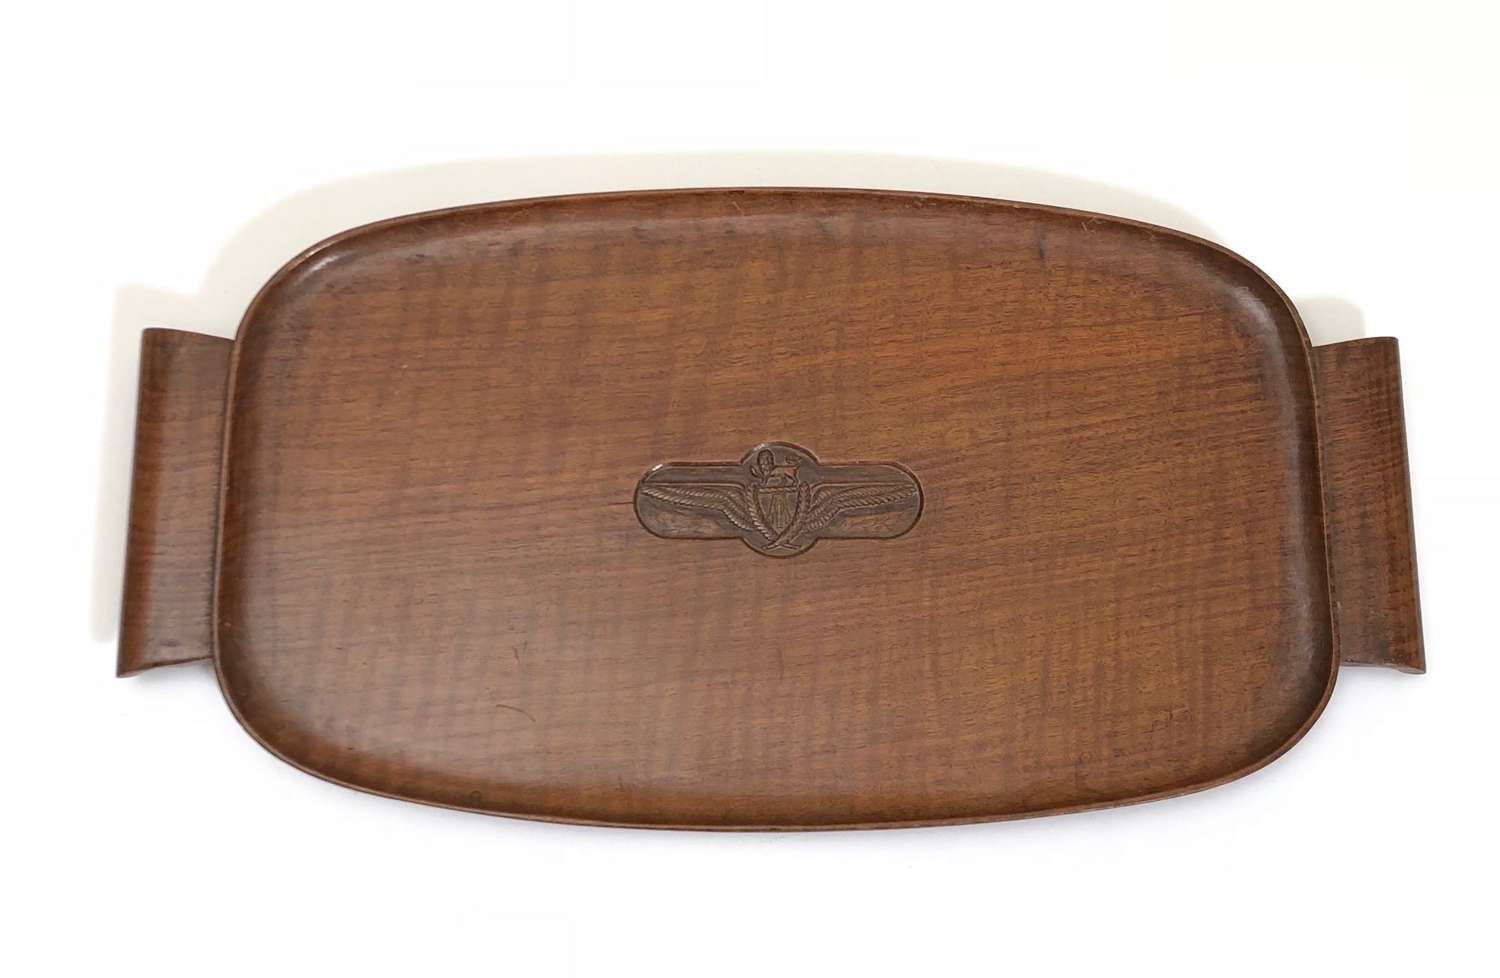 1930’s Imperial Airways Carved Tray.